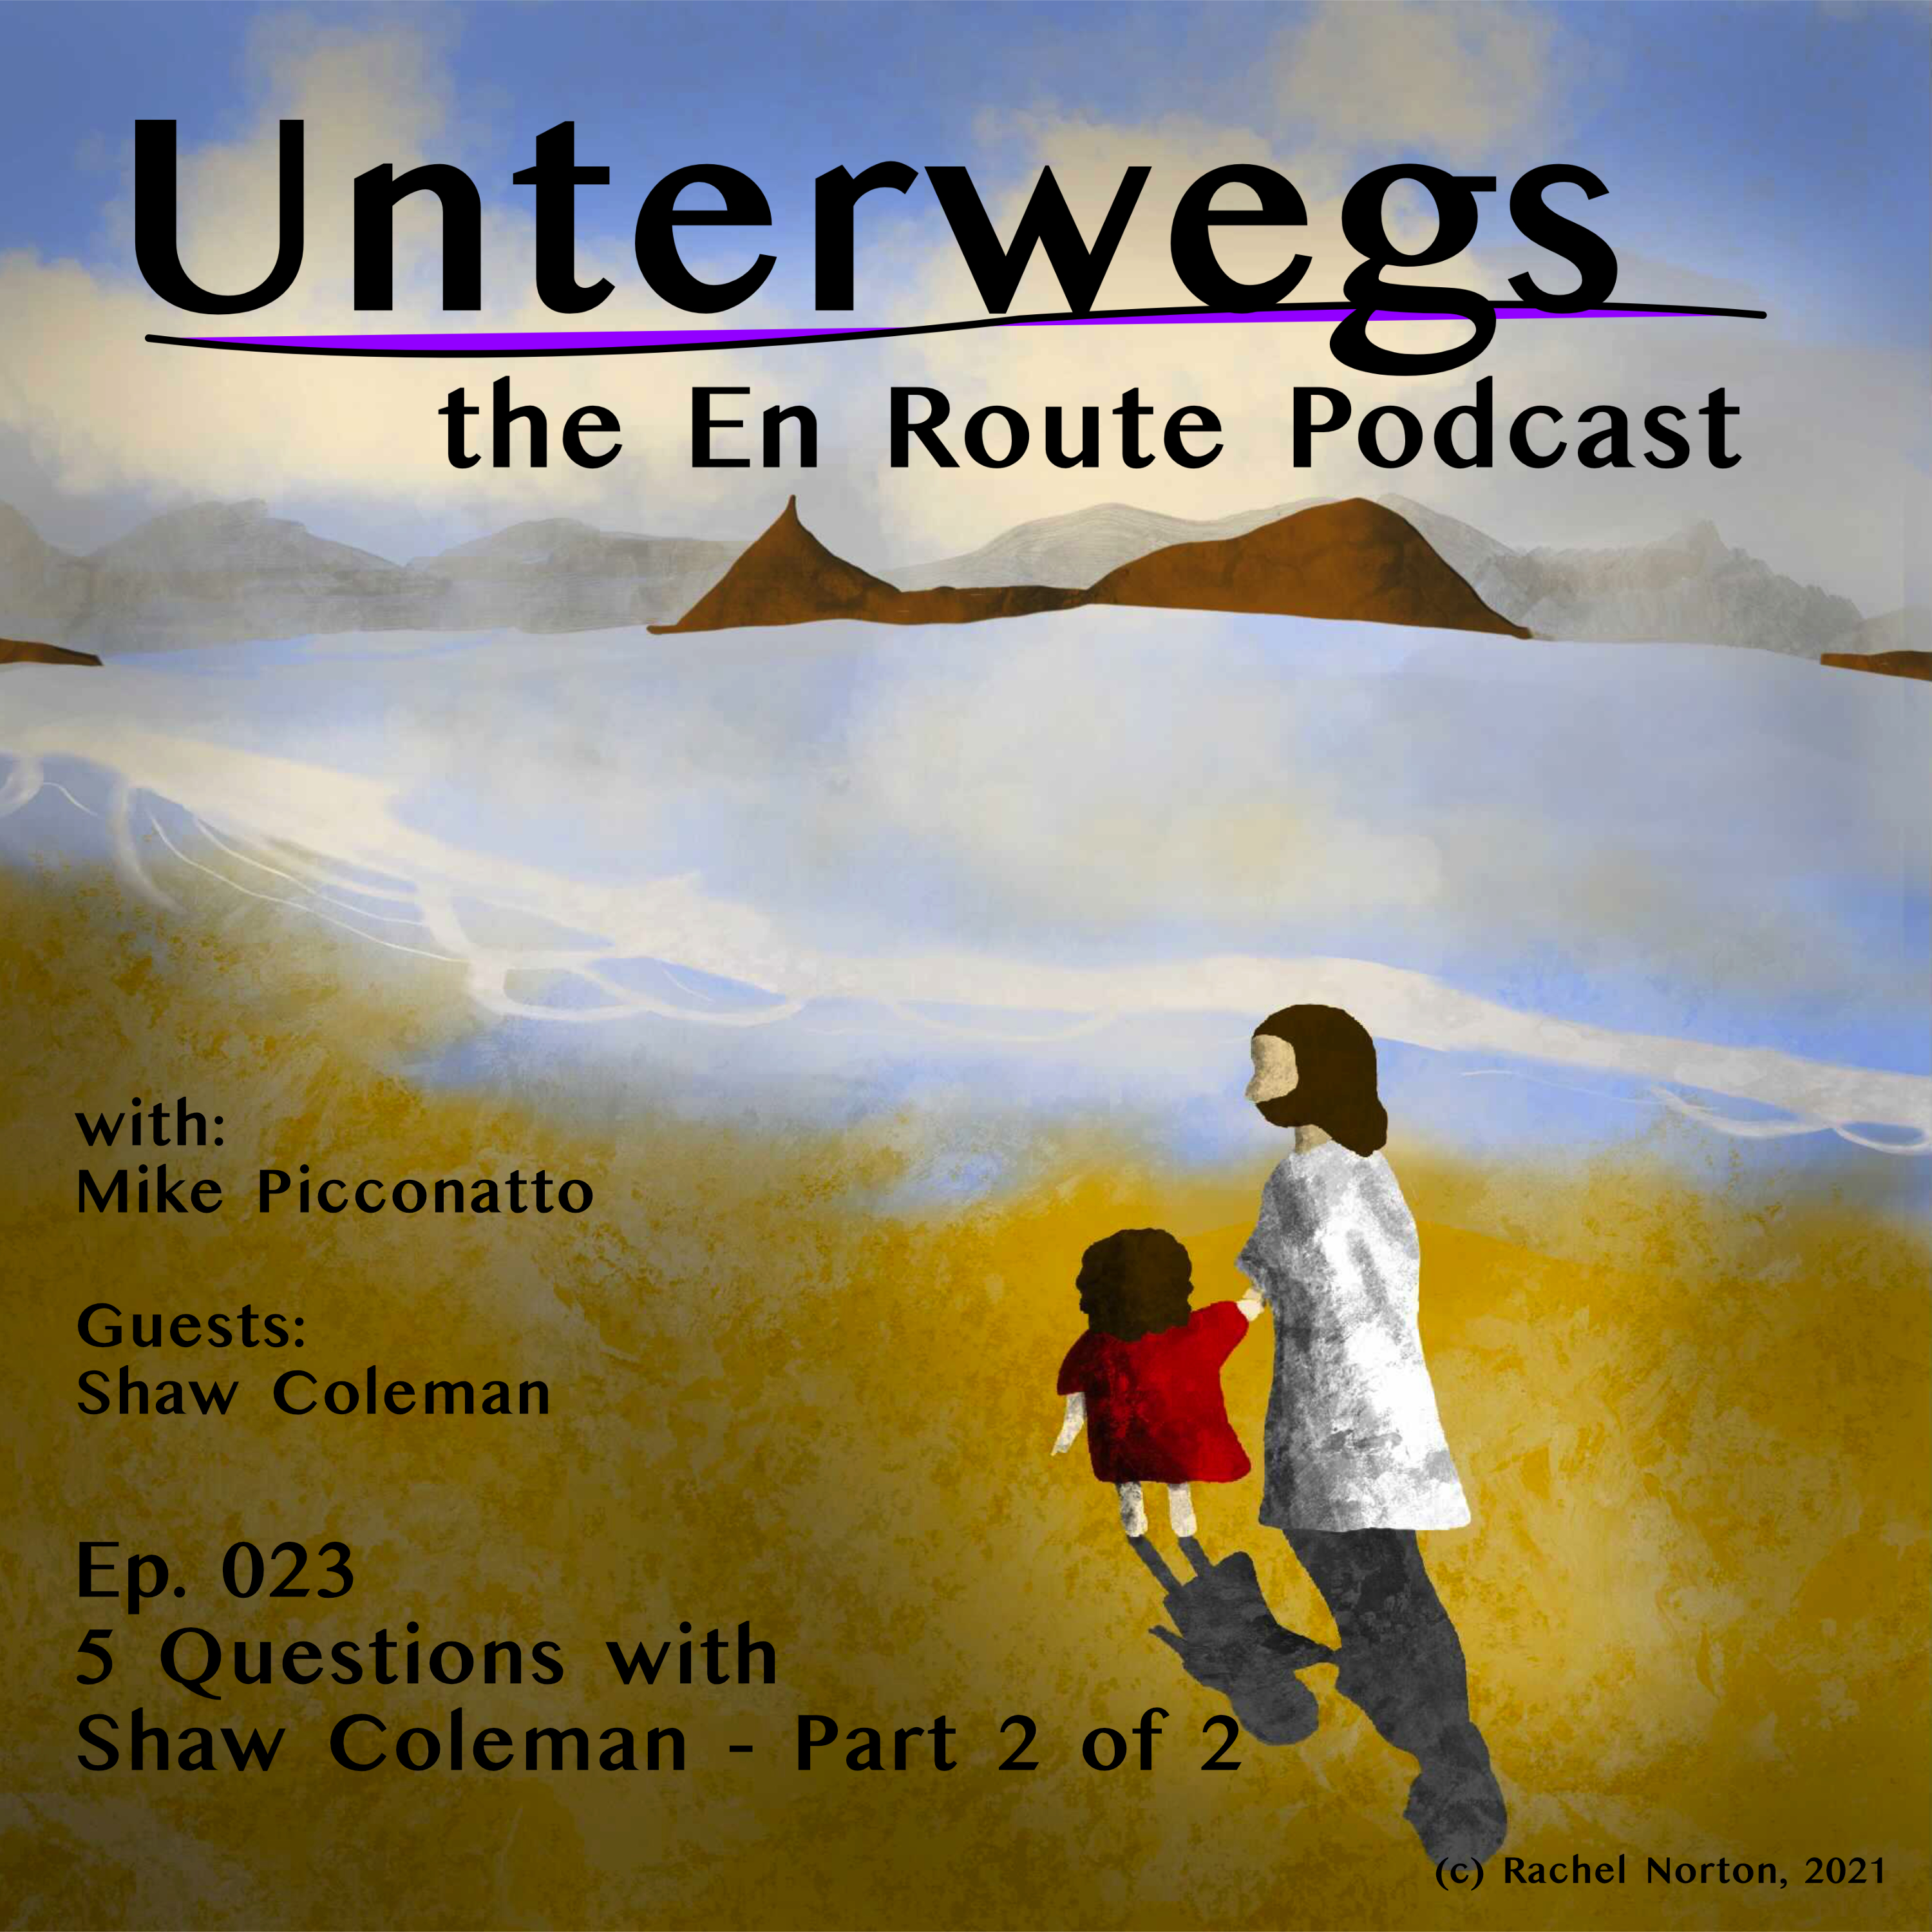 Episode 023 - 5 Questions with Shaw Coleman Part 2 of 2